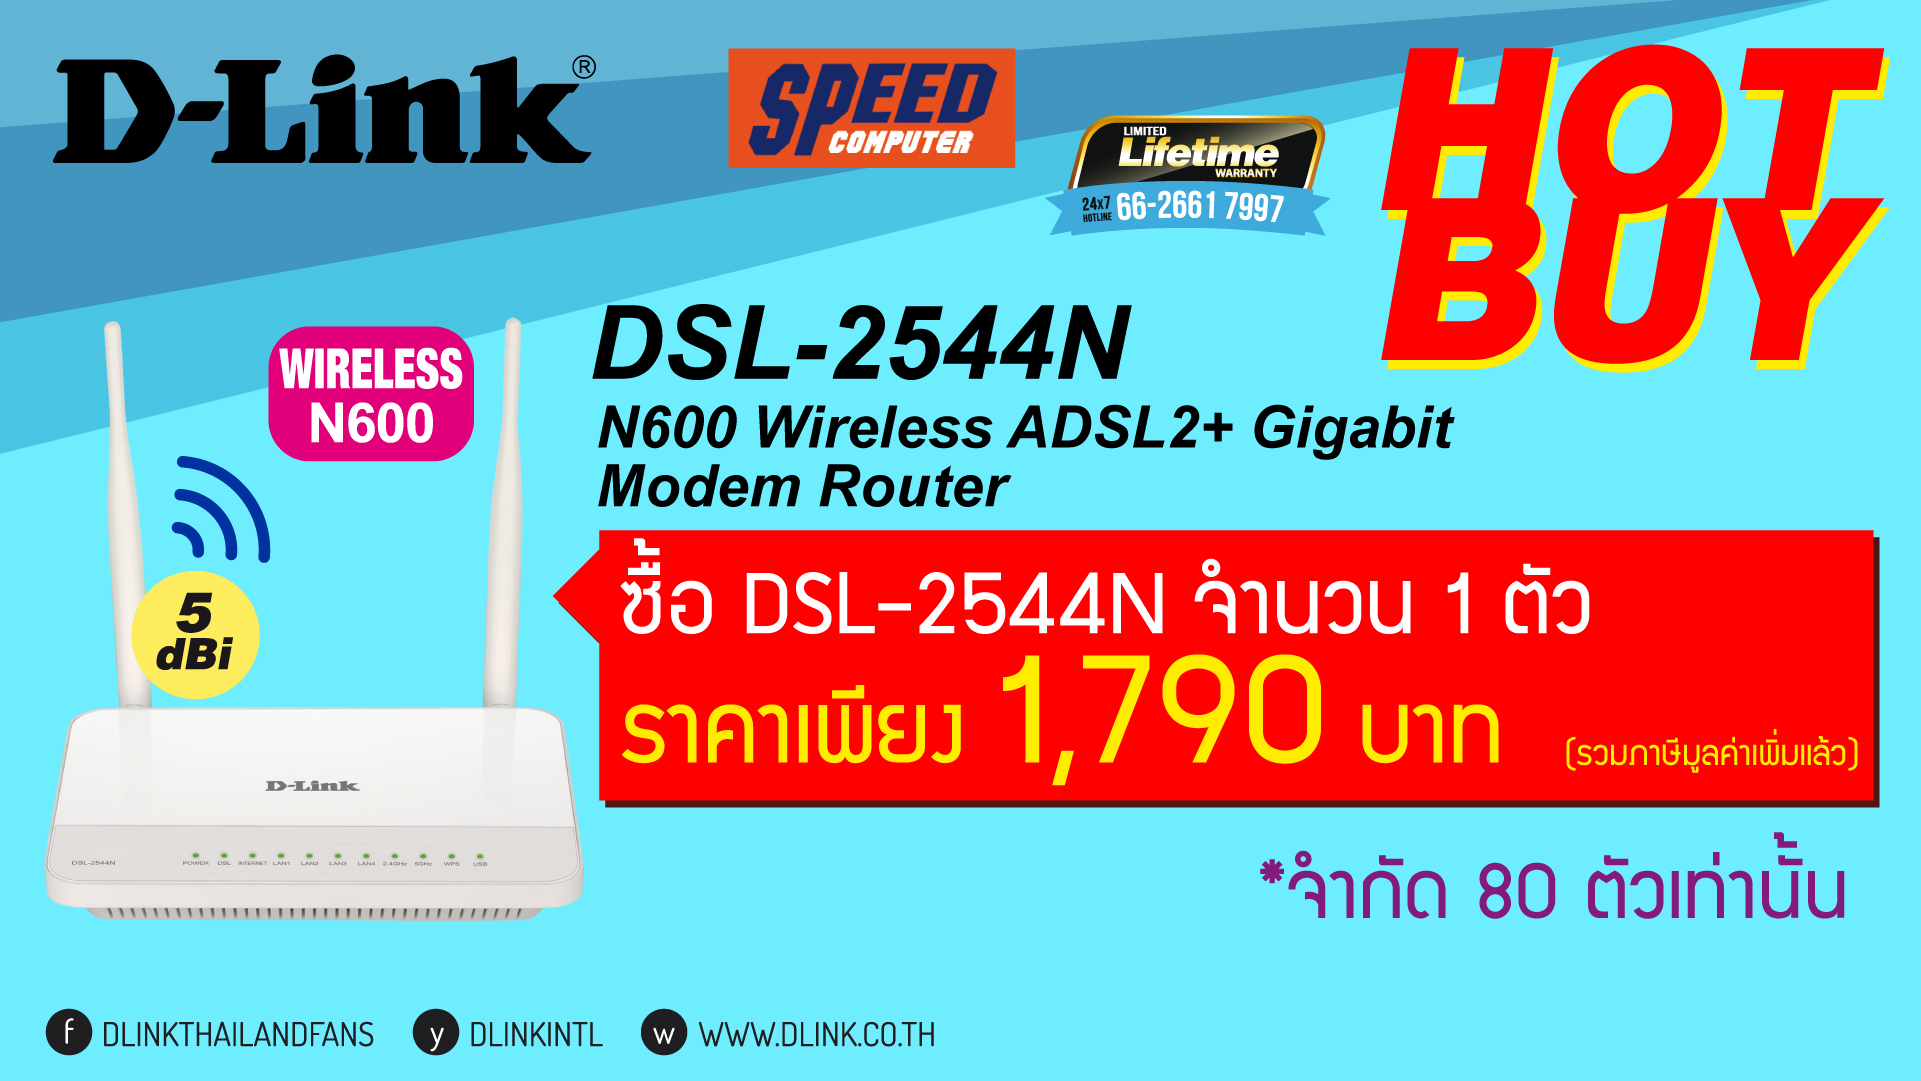 D-Link-Commart-Screen-for-Speed-March-16-06